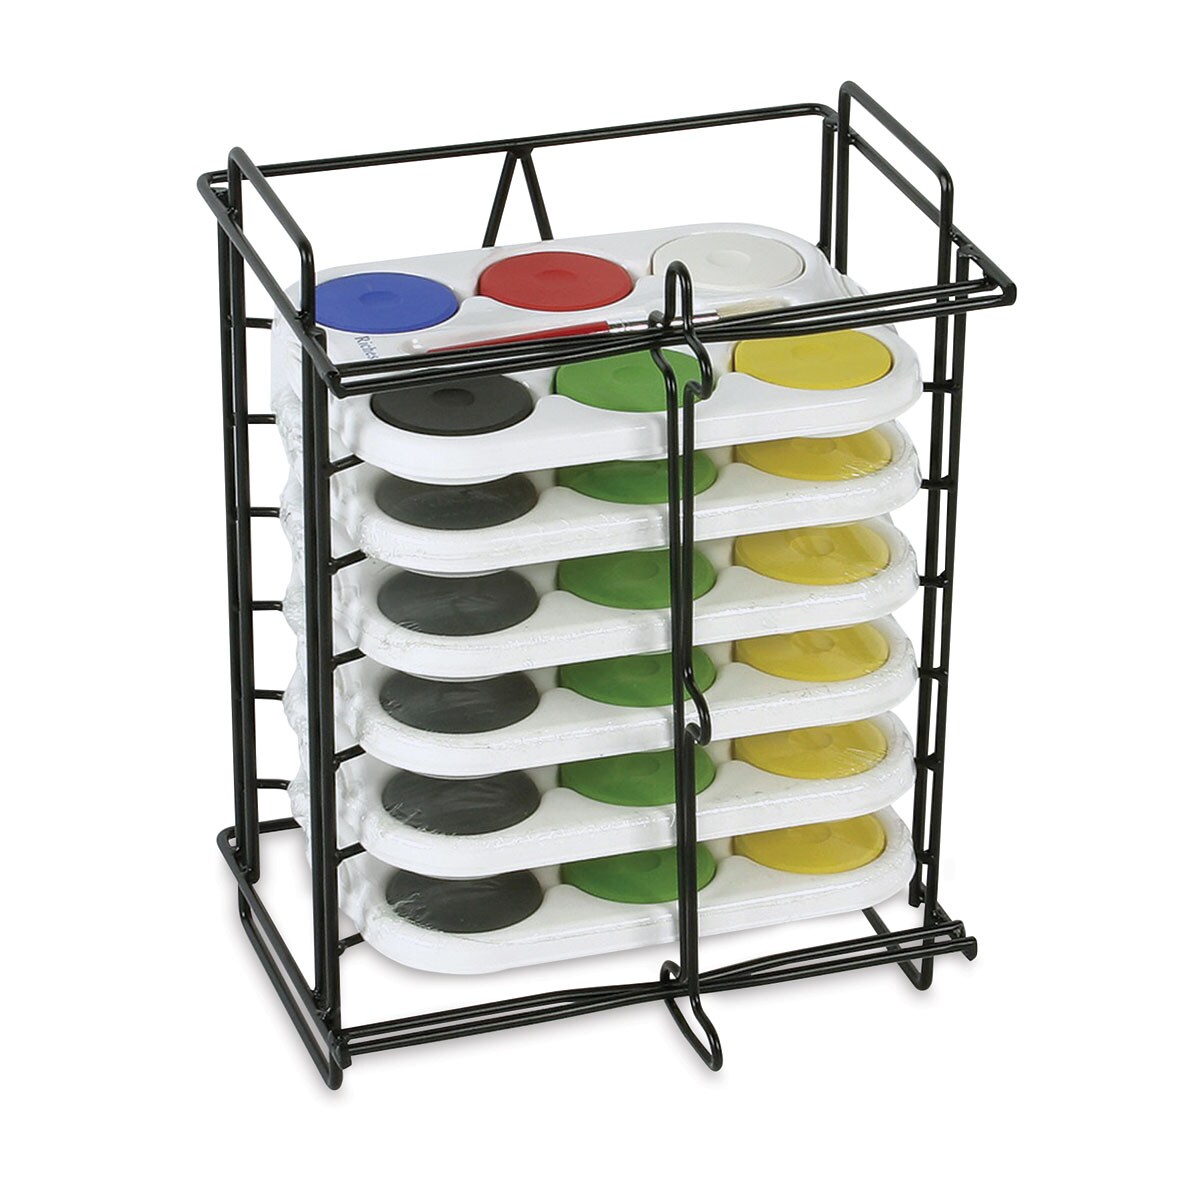 Richeson Tempera Cakes and Sets - 6 Tier Tempera Rack with 6, 6-Color Sets